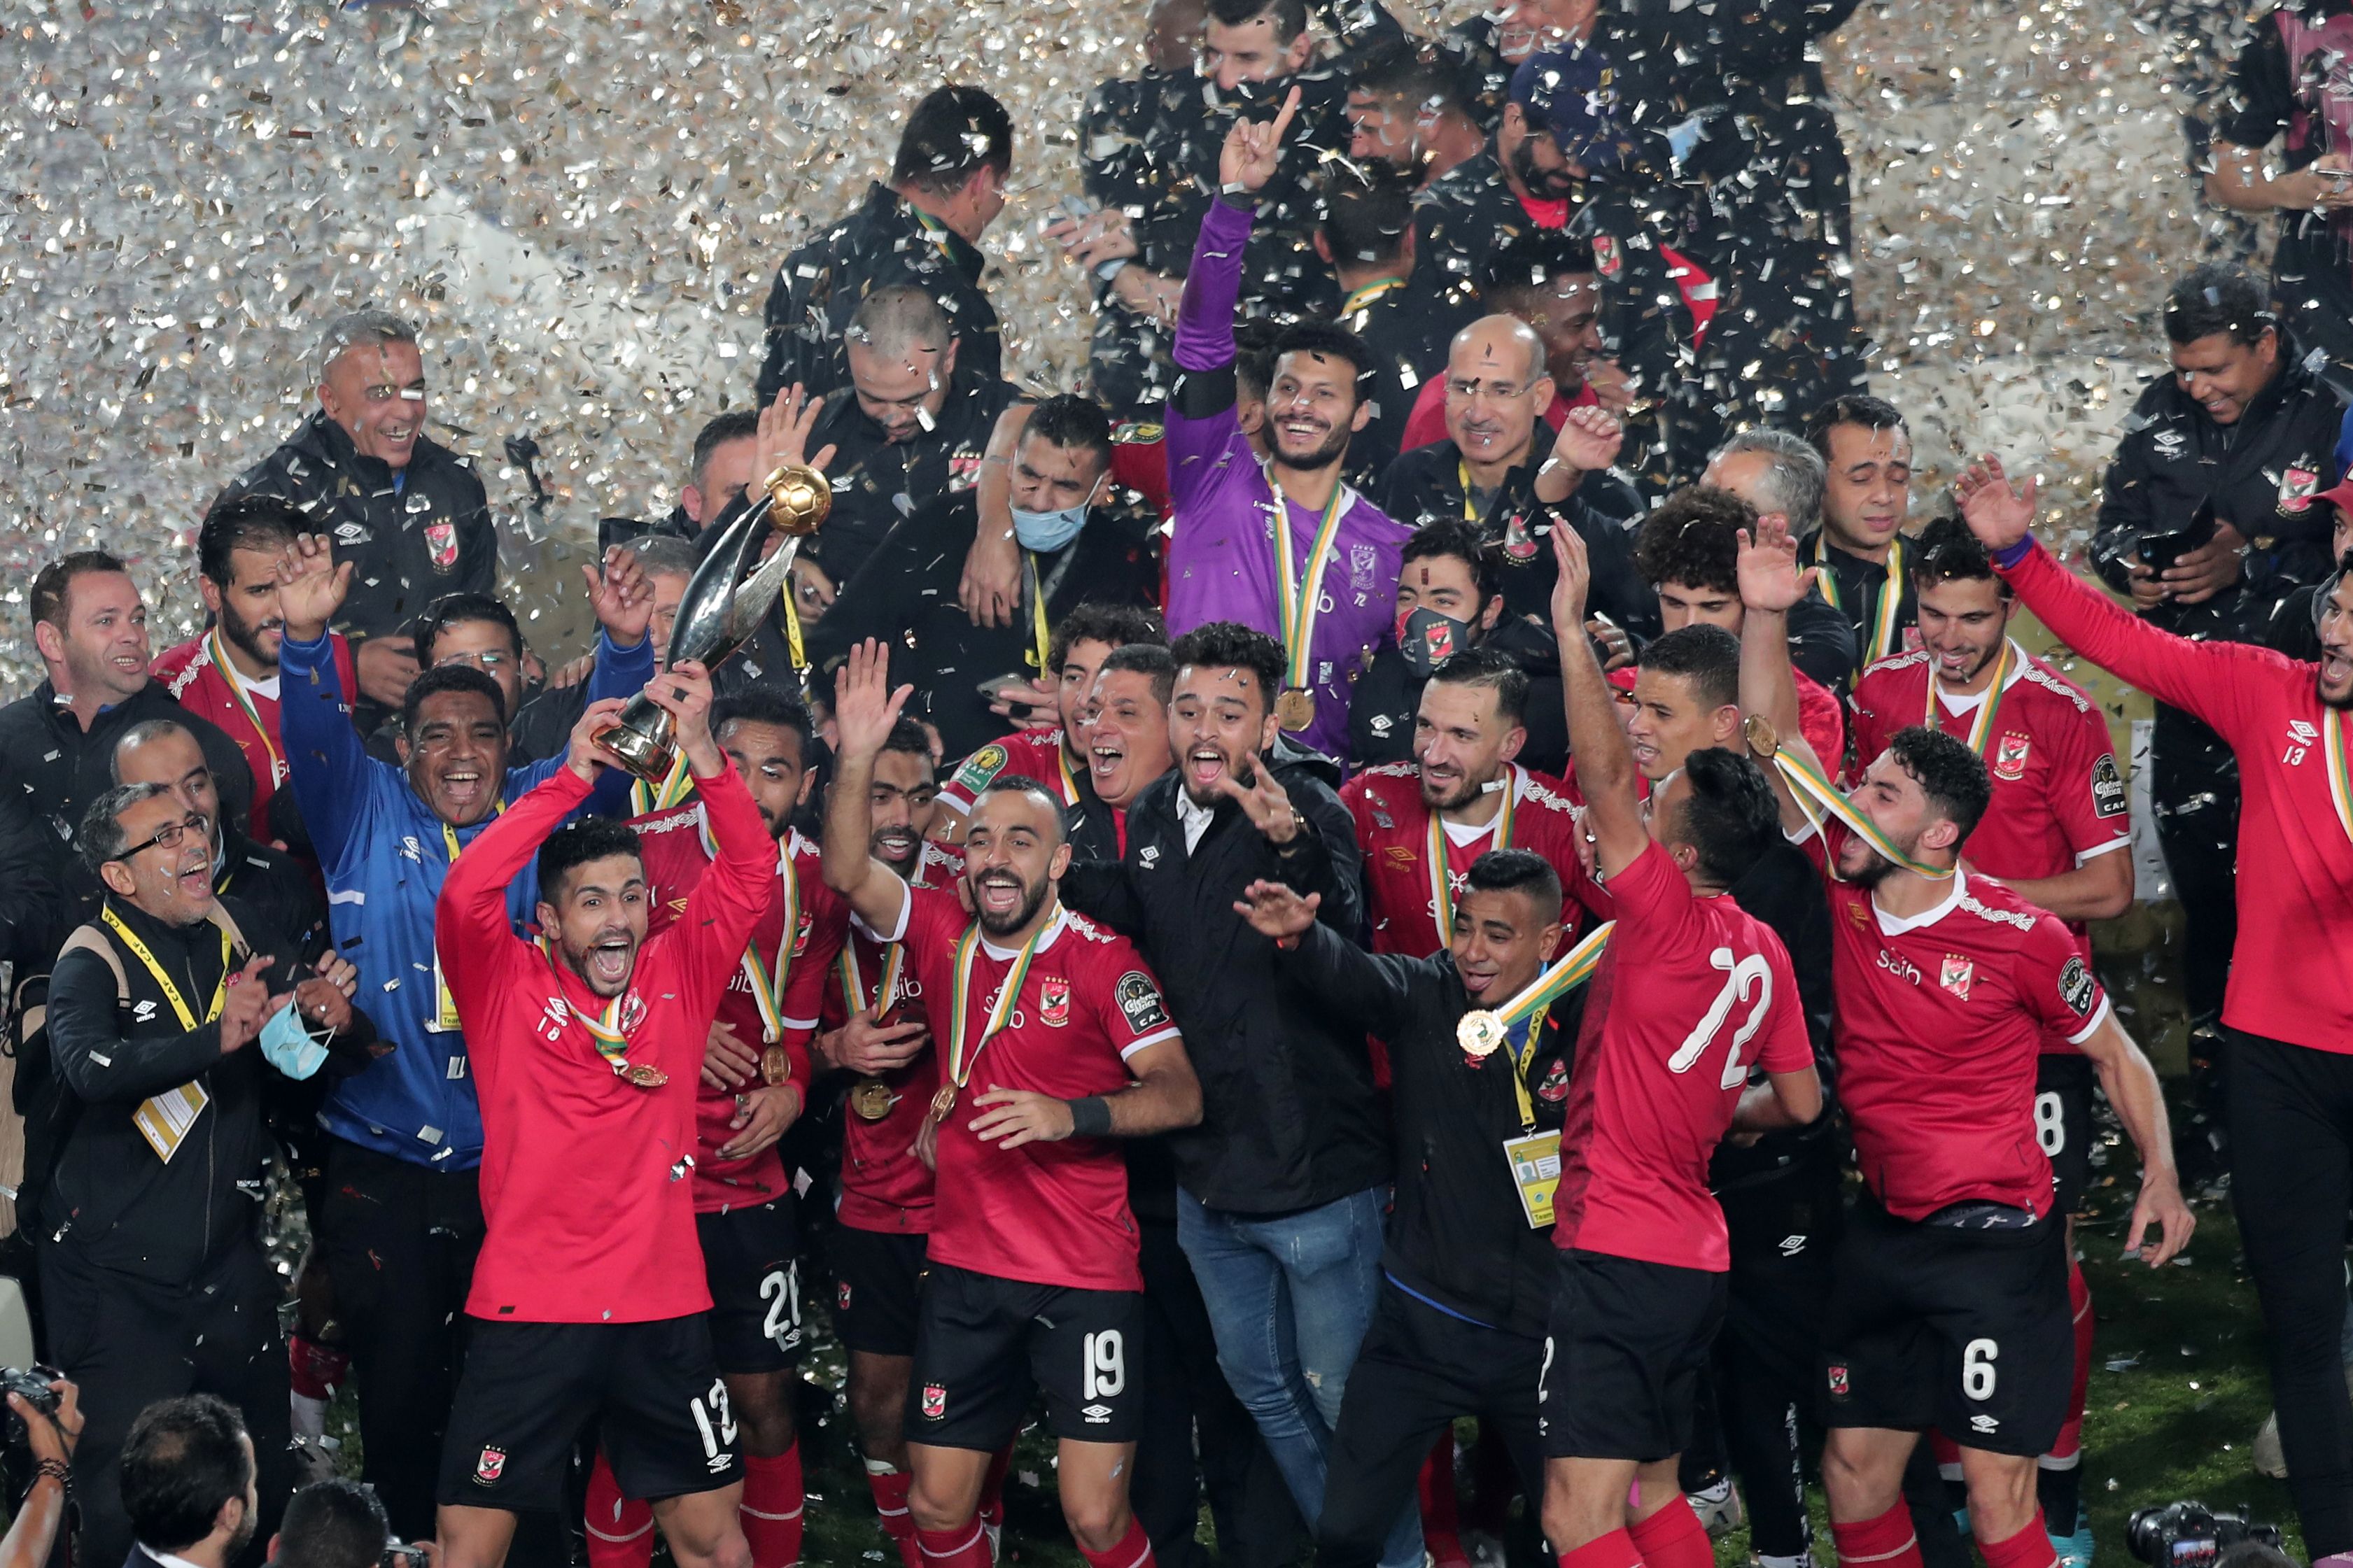 Al Ahly are Africa's most successful club